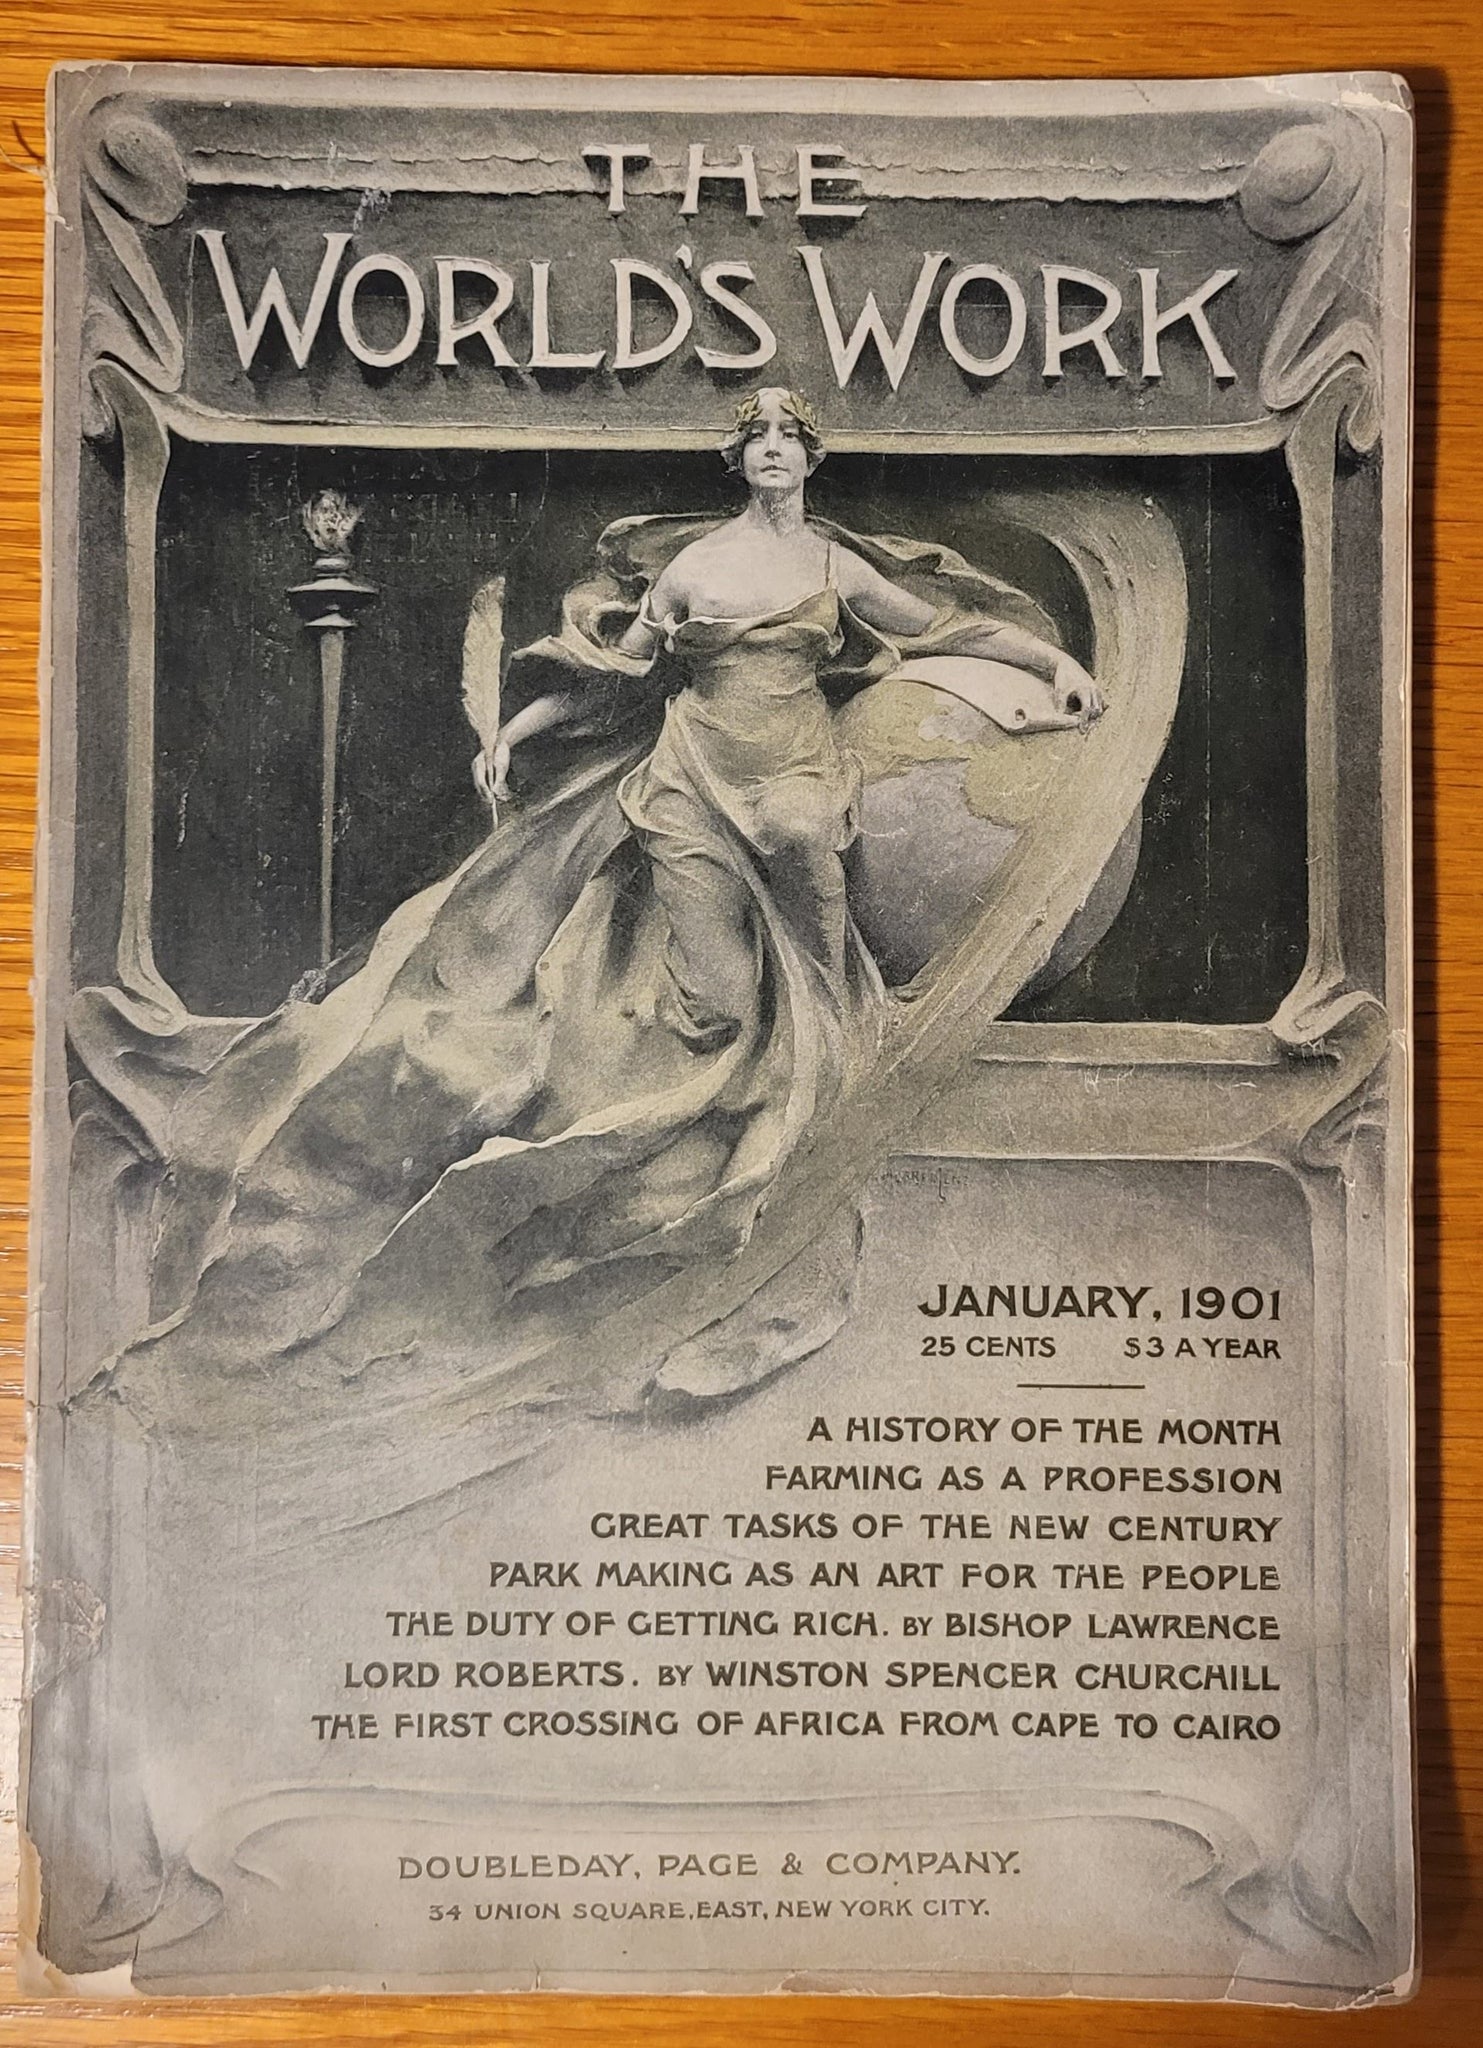 The Pioneers Behind Doubleday & Page Publishing: Unveiling "The World's Work" and Occult Connections